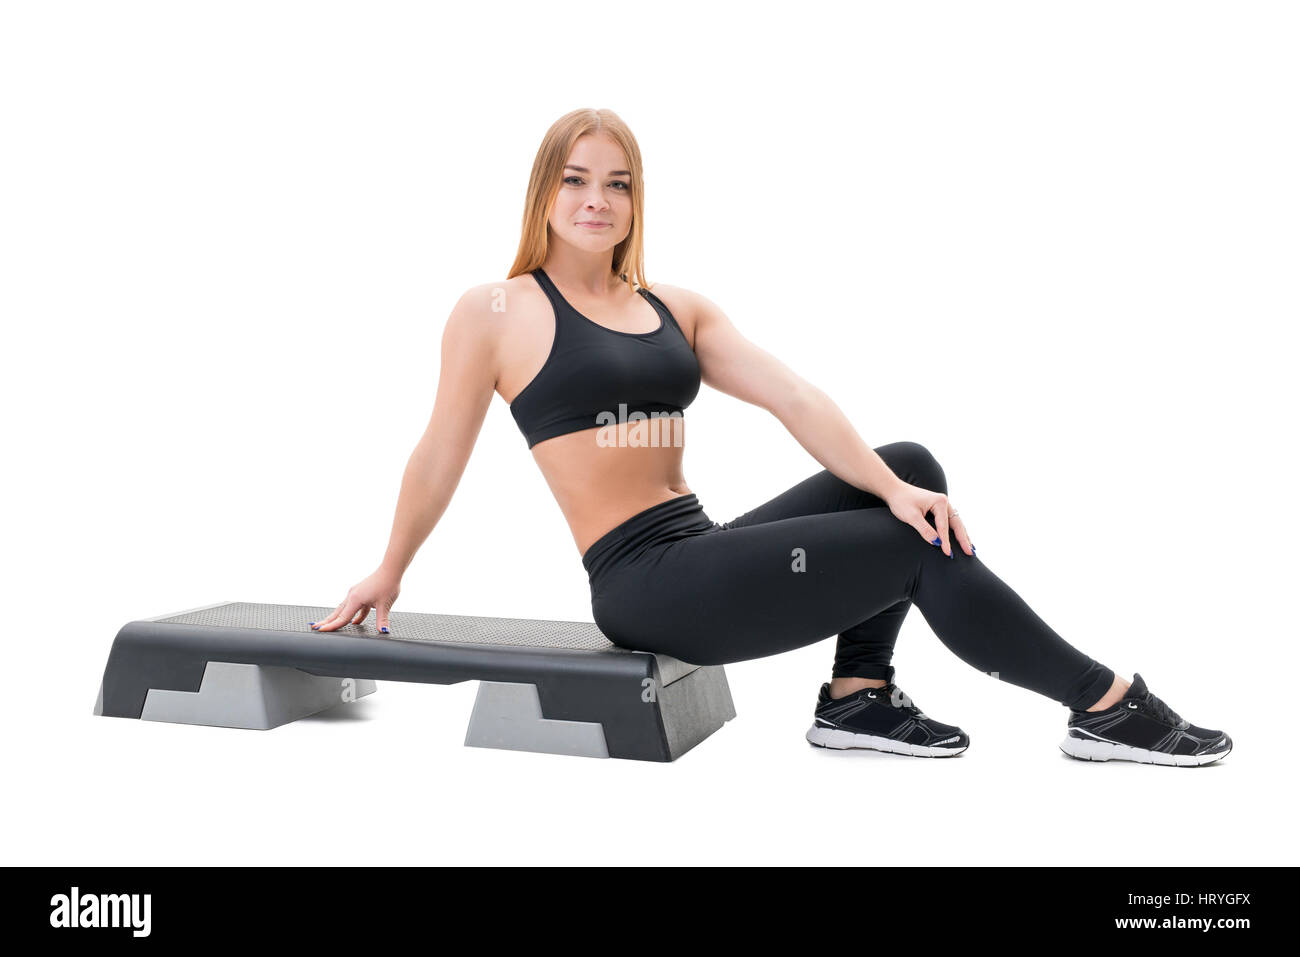 Step fitness trainer with stepper at studio Stock Photo - Alamy